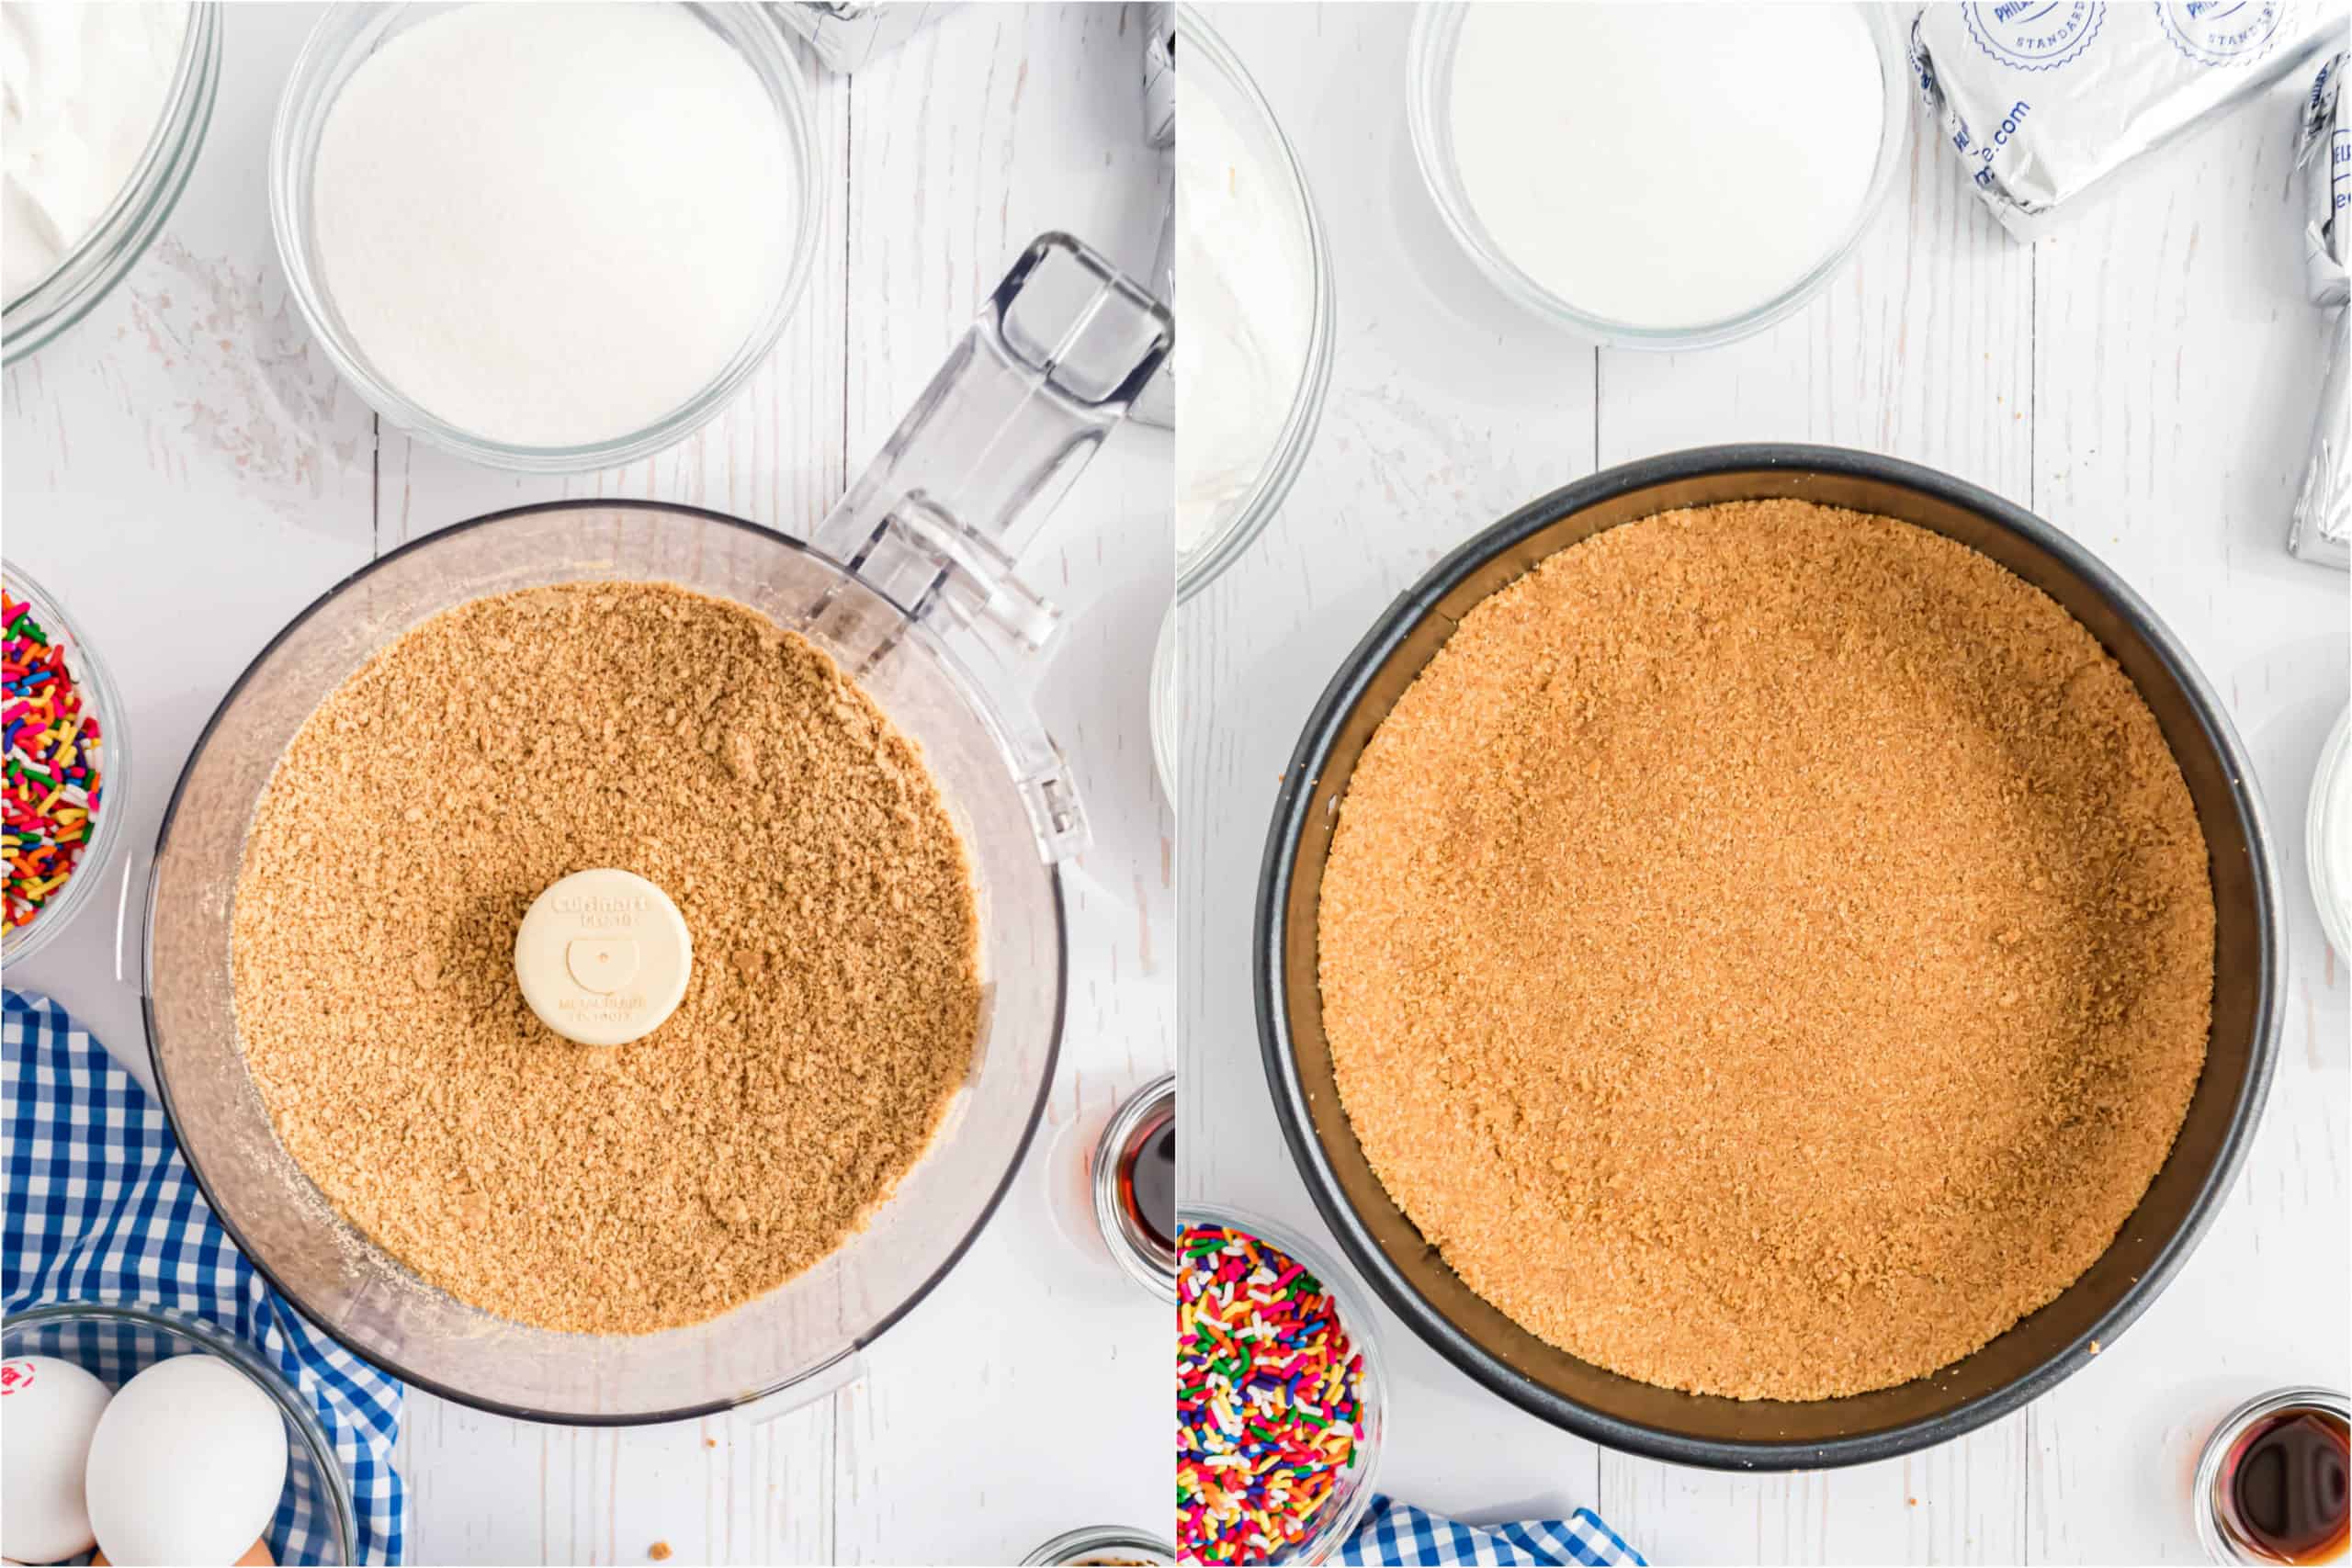 Step by step photos showing how to make cheesecake crust.